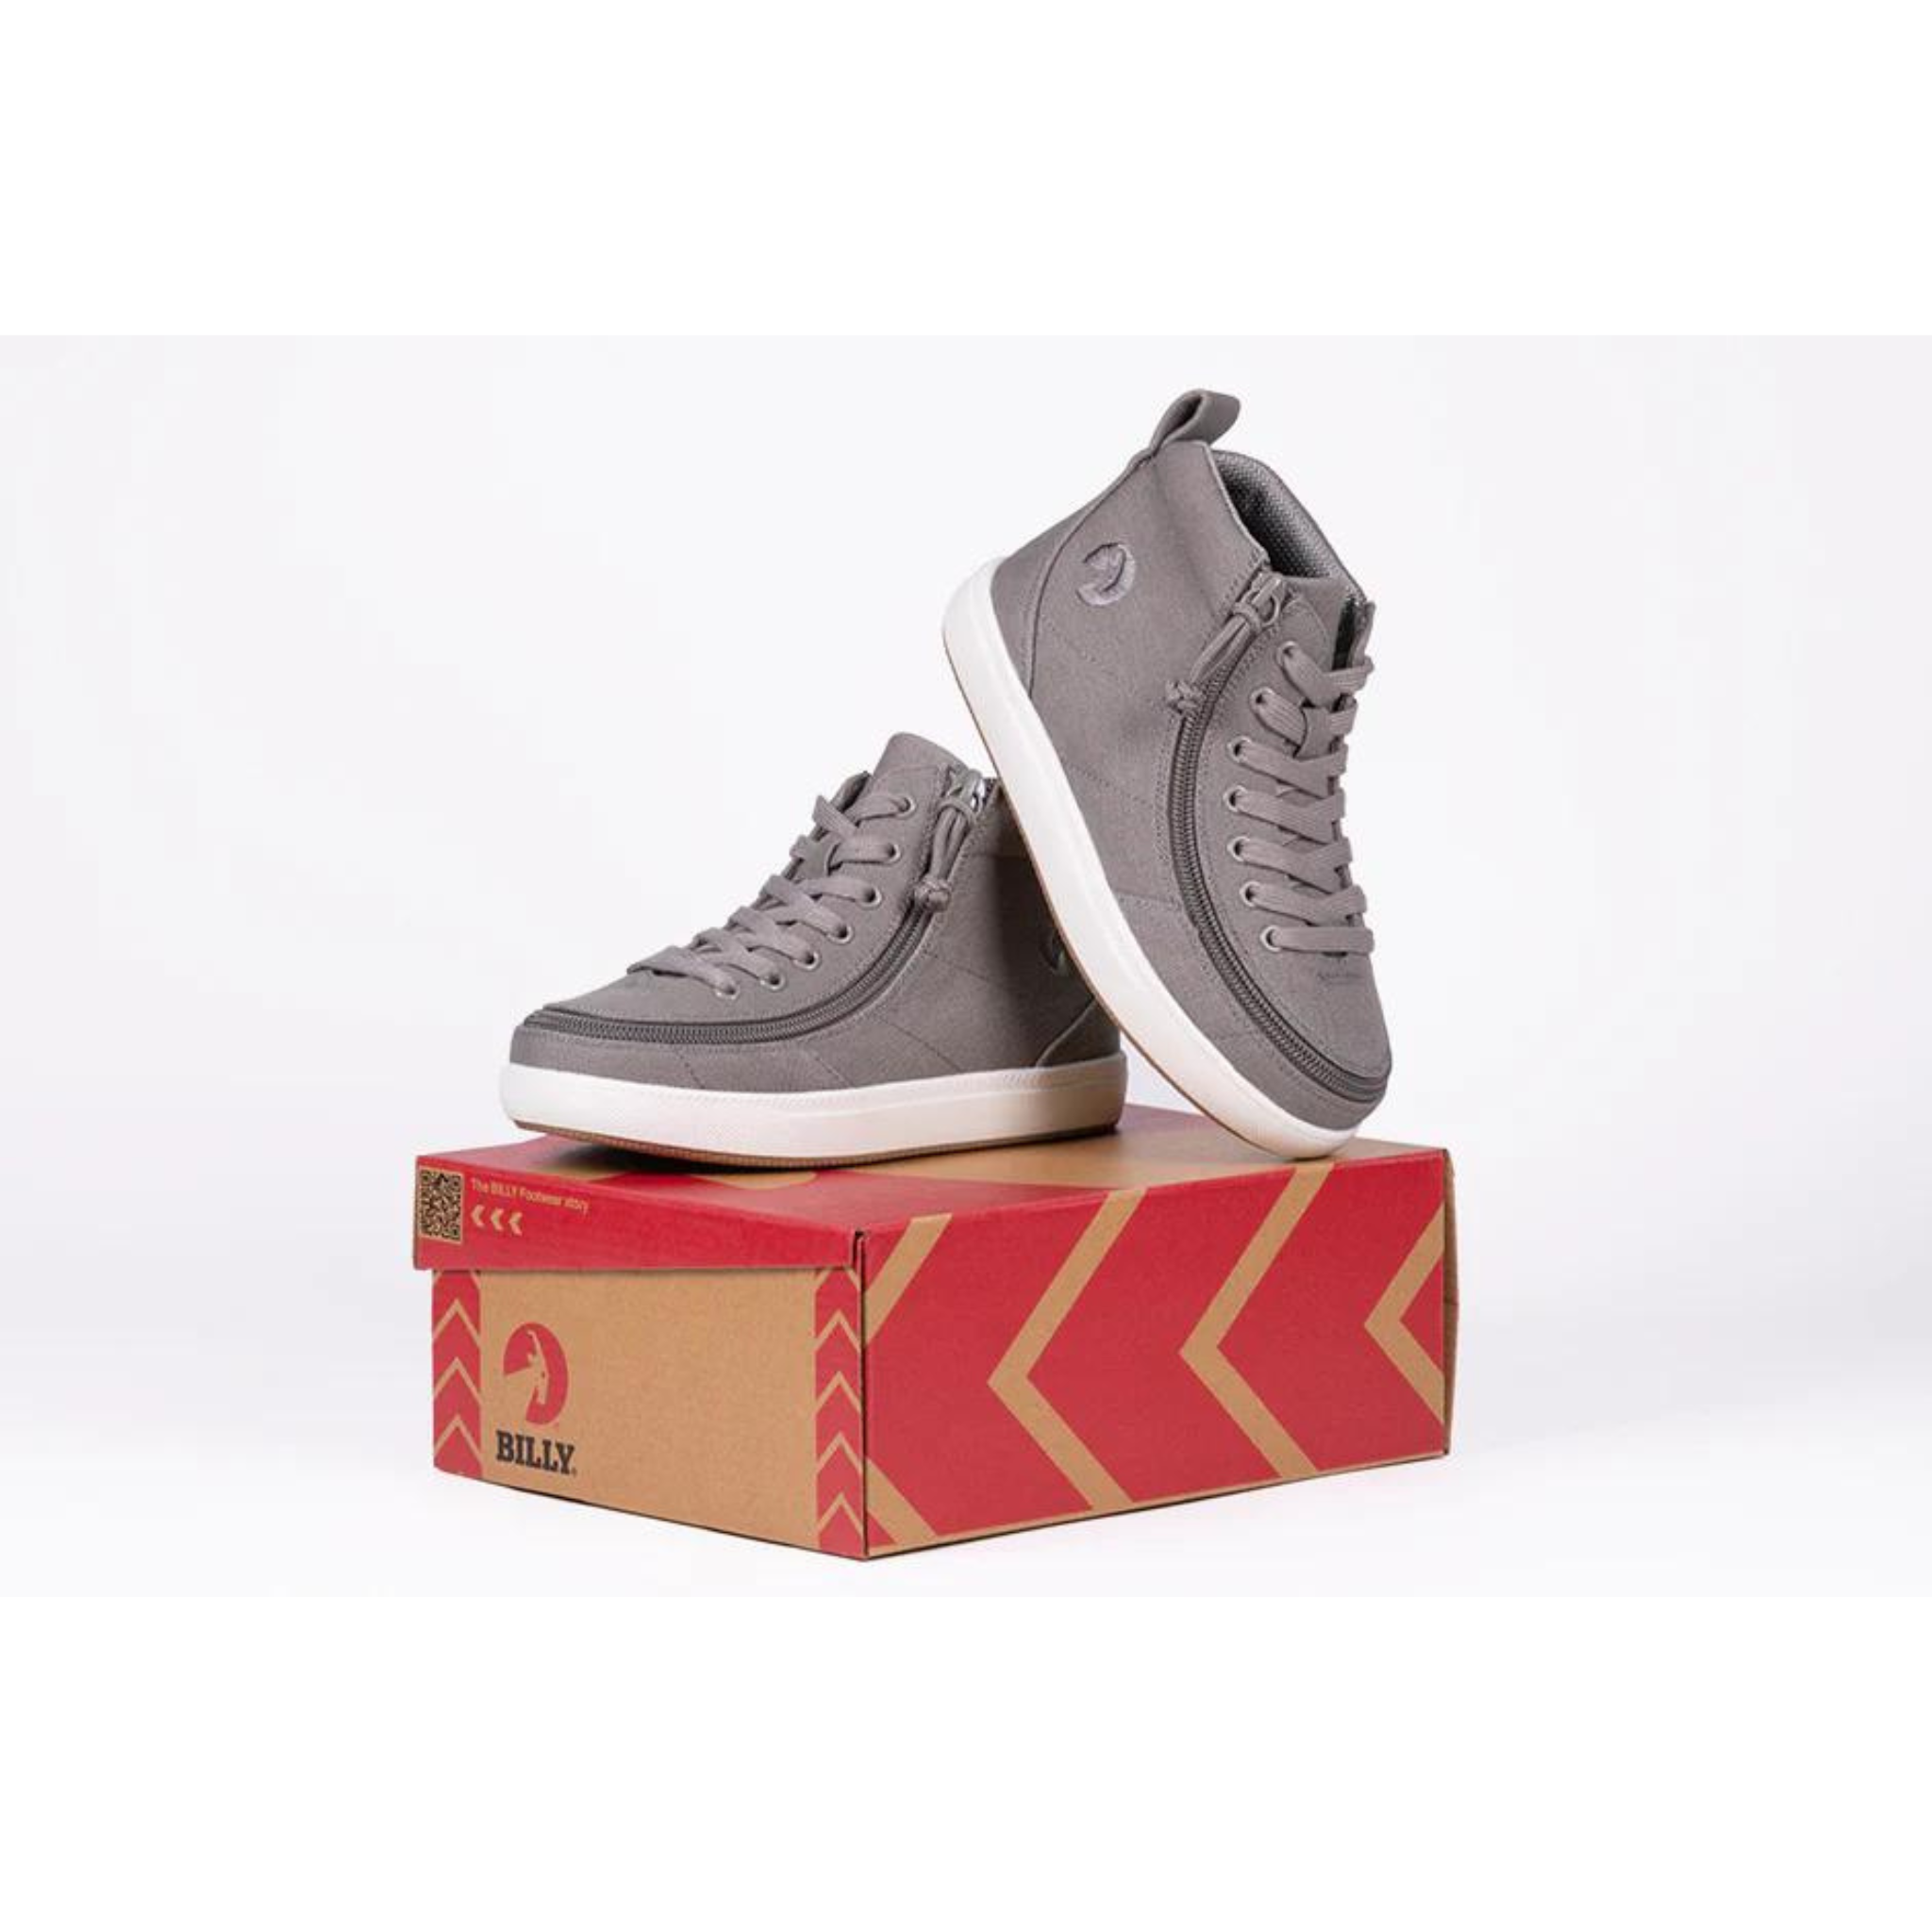 Billy Footwear (Toddlers) DR II Fit - High Top DR Dark Grey Canvas Shoes